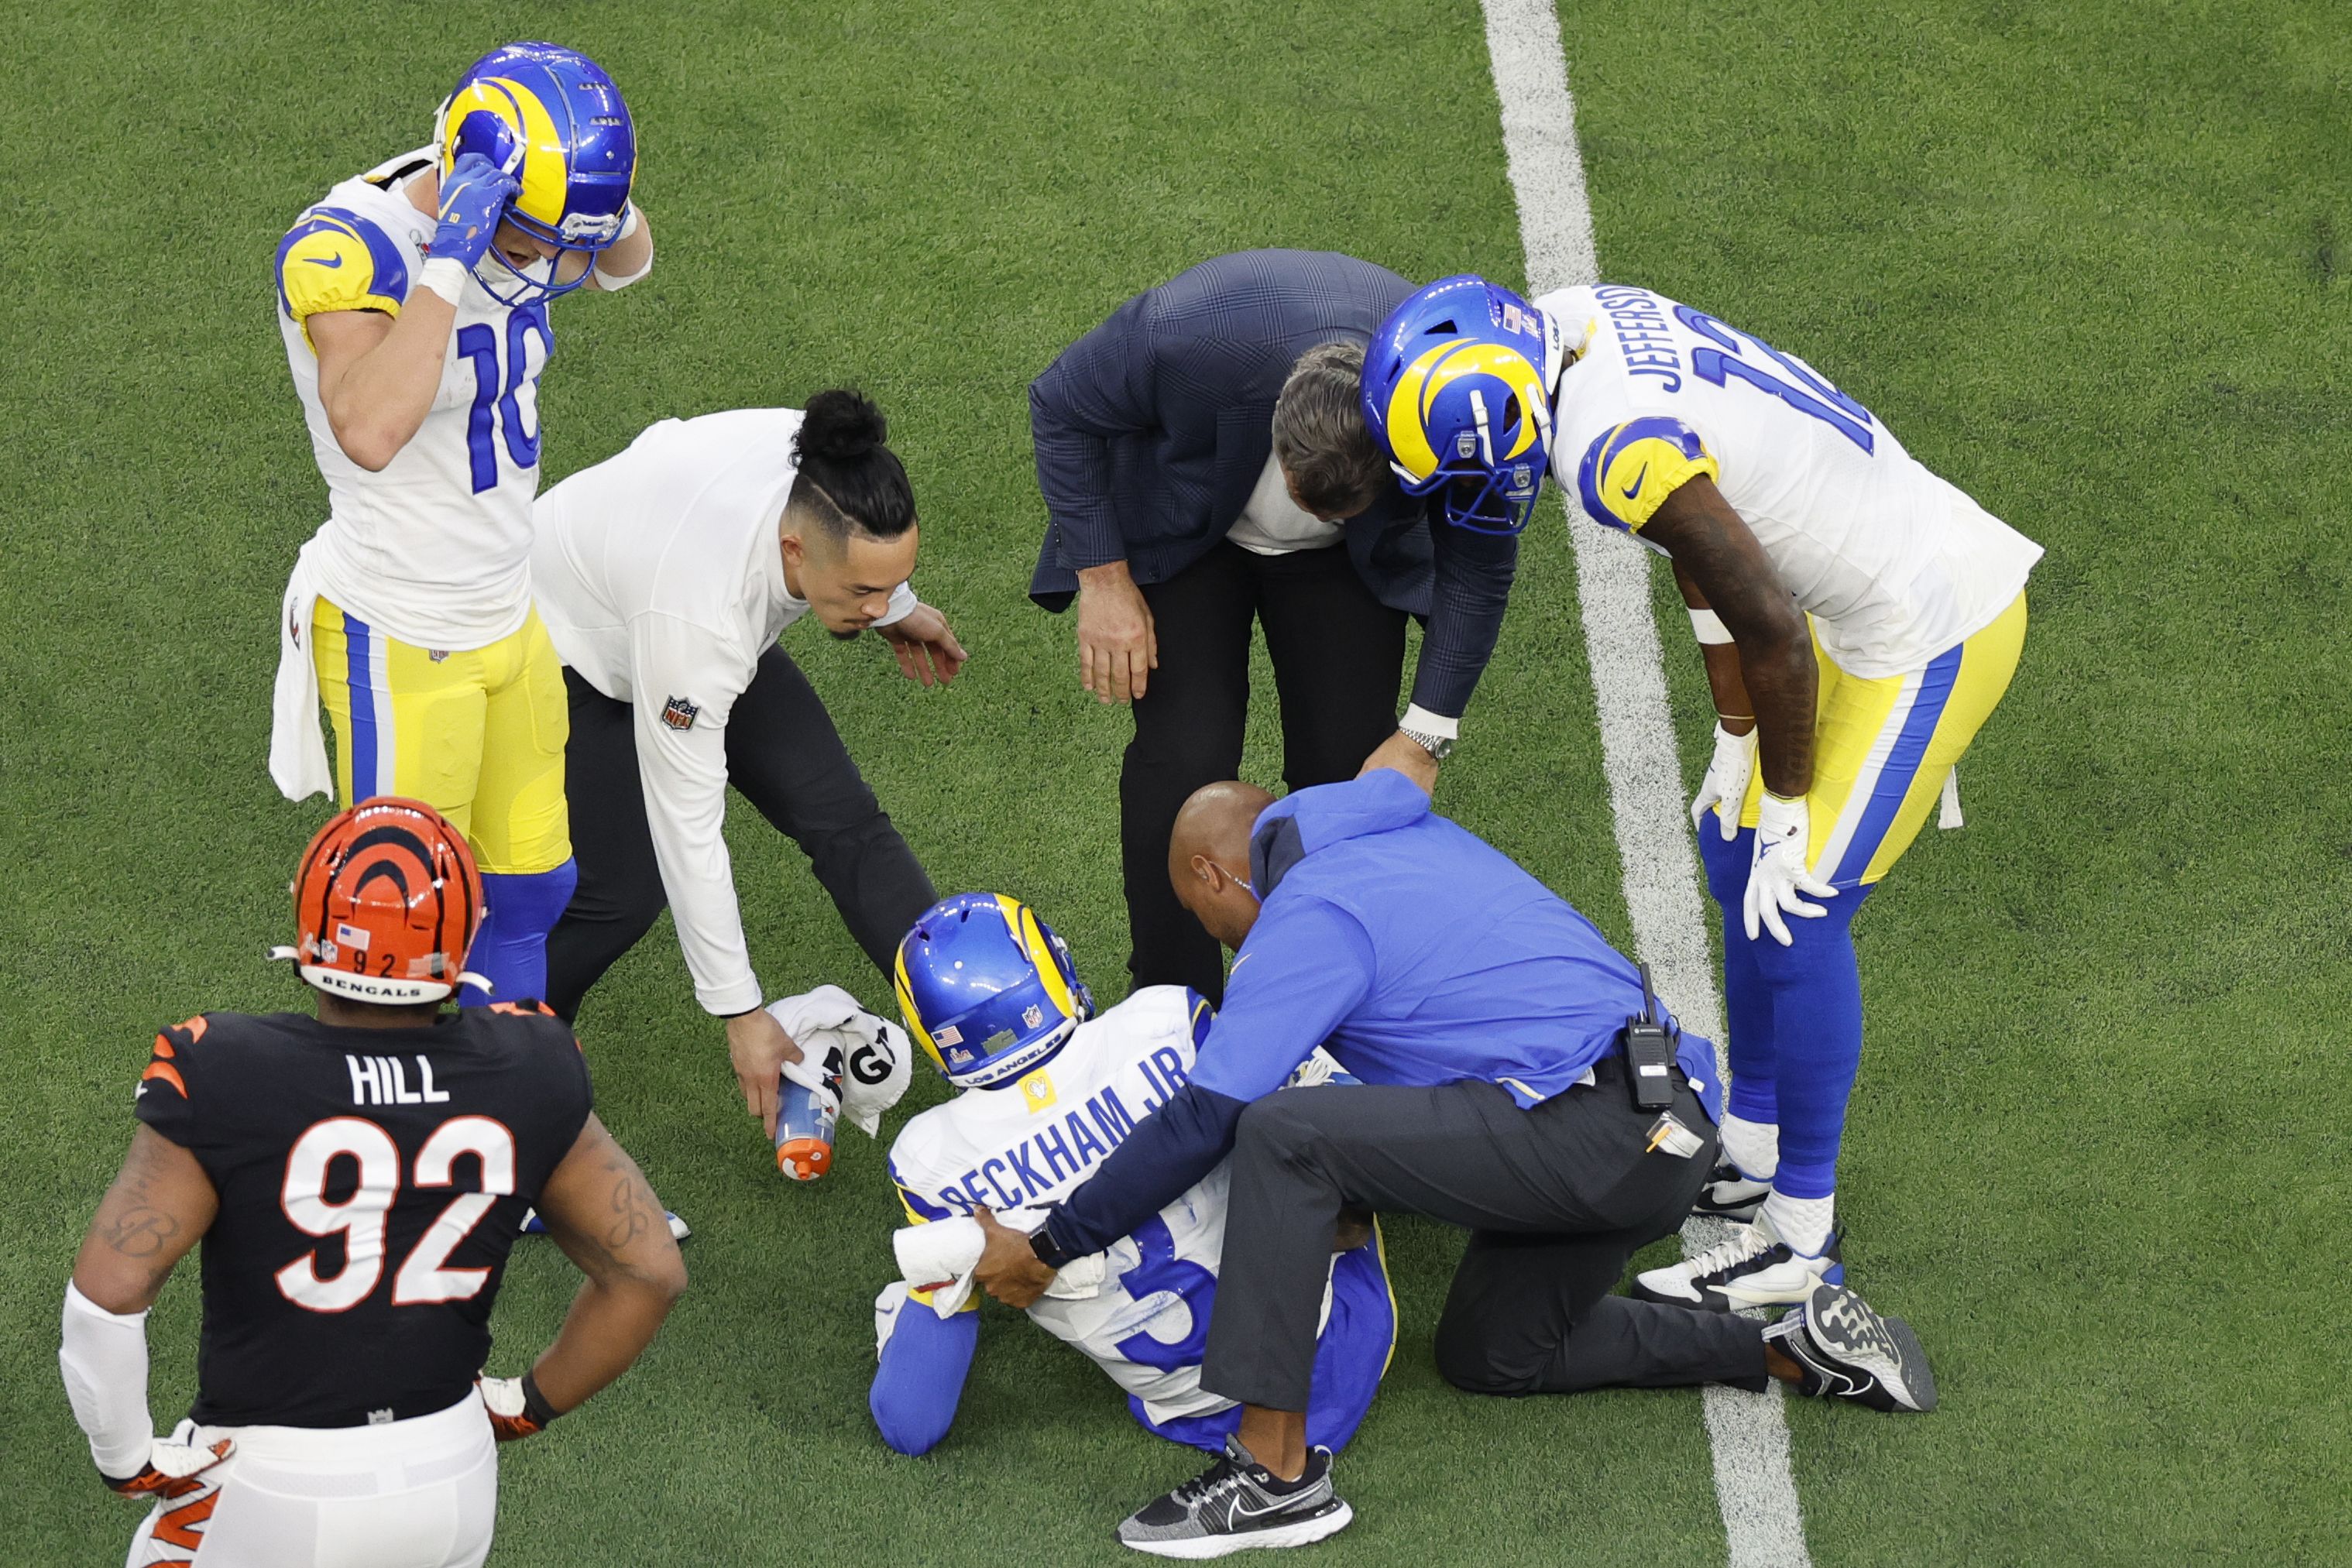 Los Angeles Rams wide receiver Odell Beckham Jr. (3) is looked after by team trainers during the second quarter of the Super Bowl at SoFi Stadium on Sunday, Feb. 13, 2022 in Inglewood, CA.